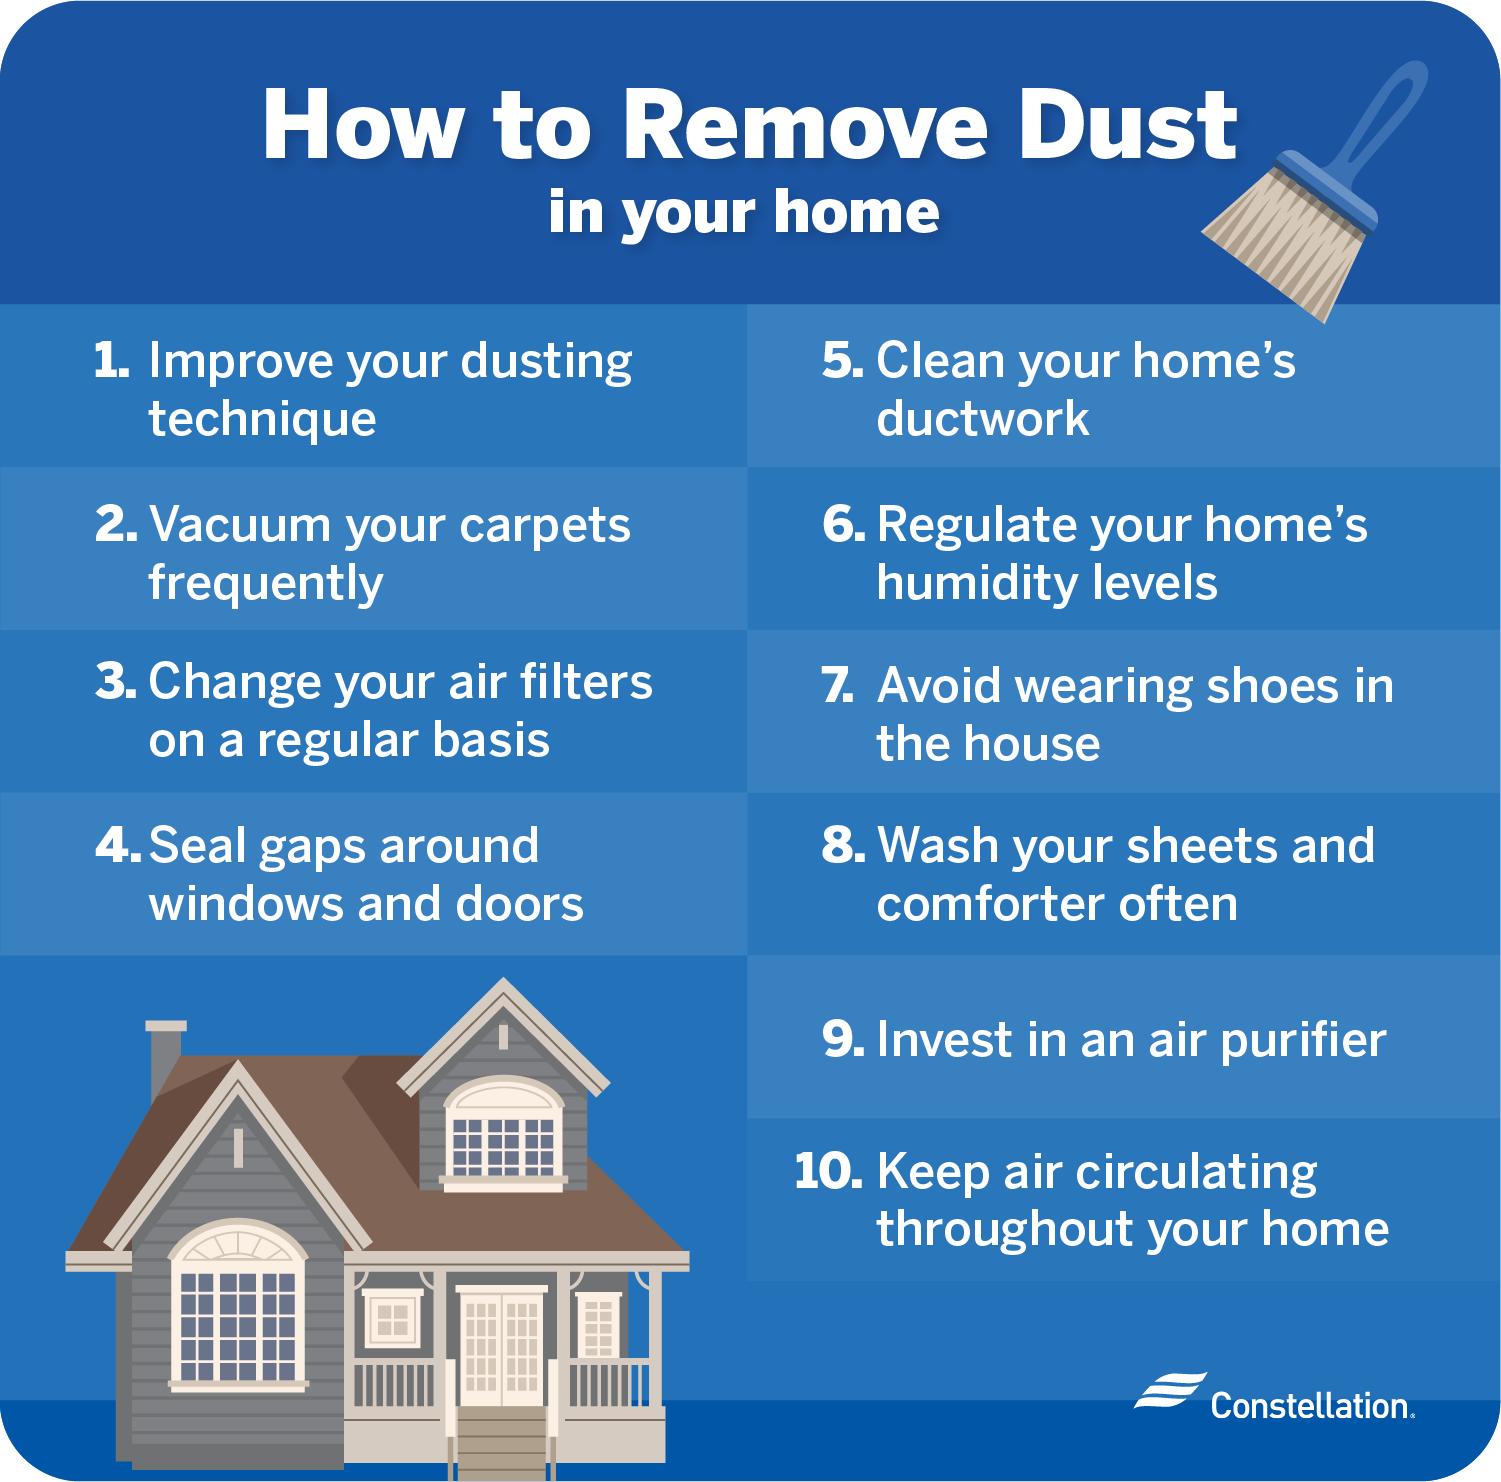 How to remove dust in your home